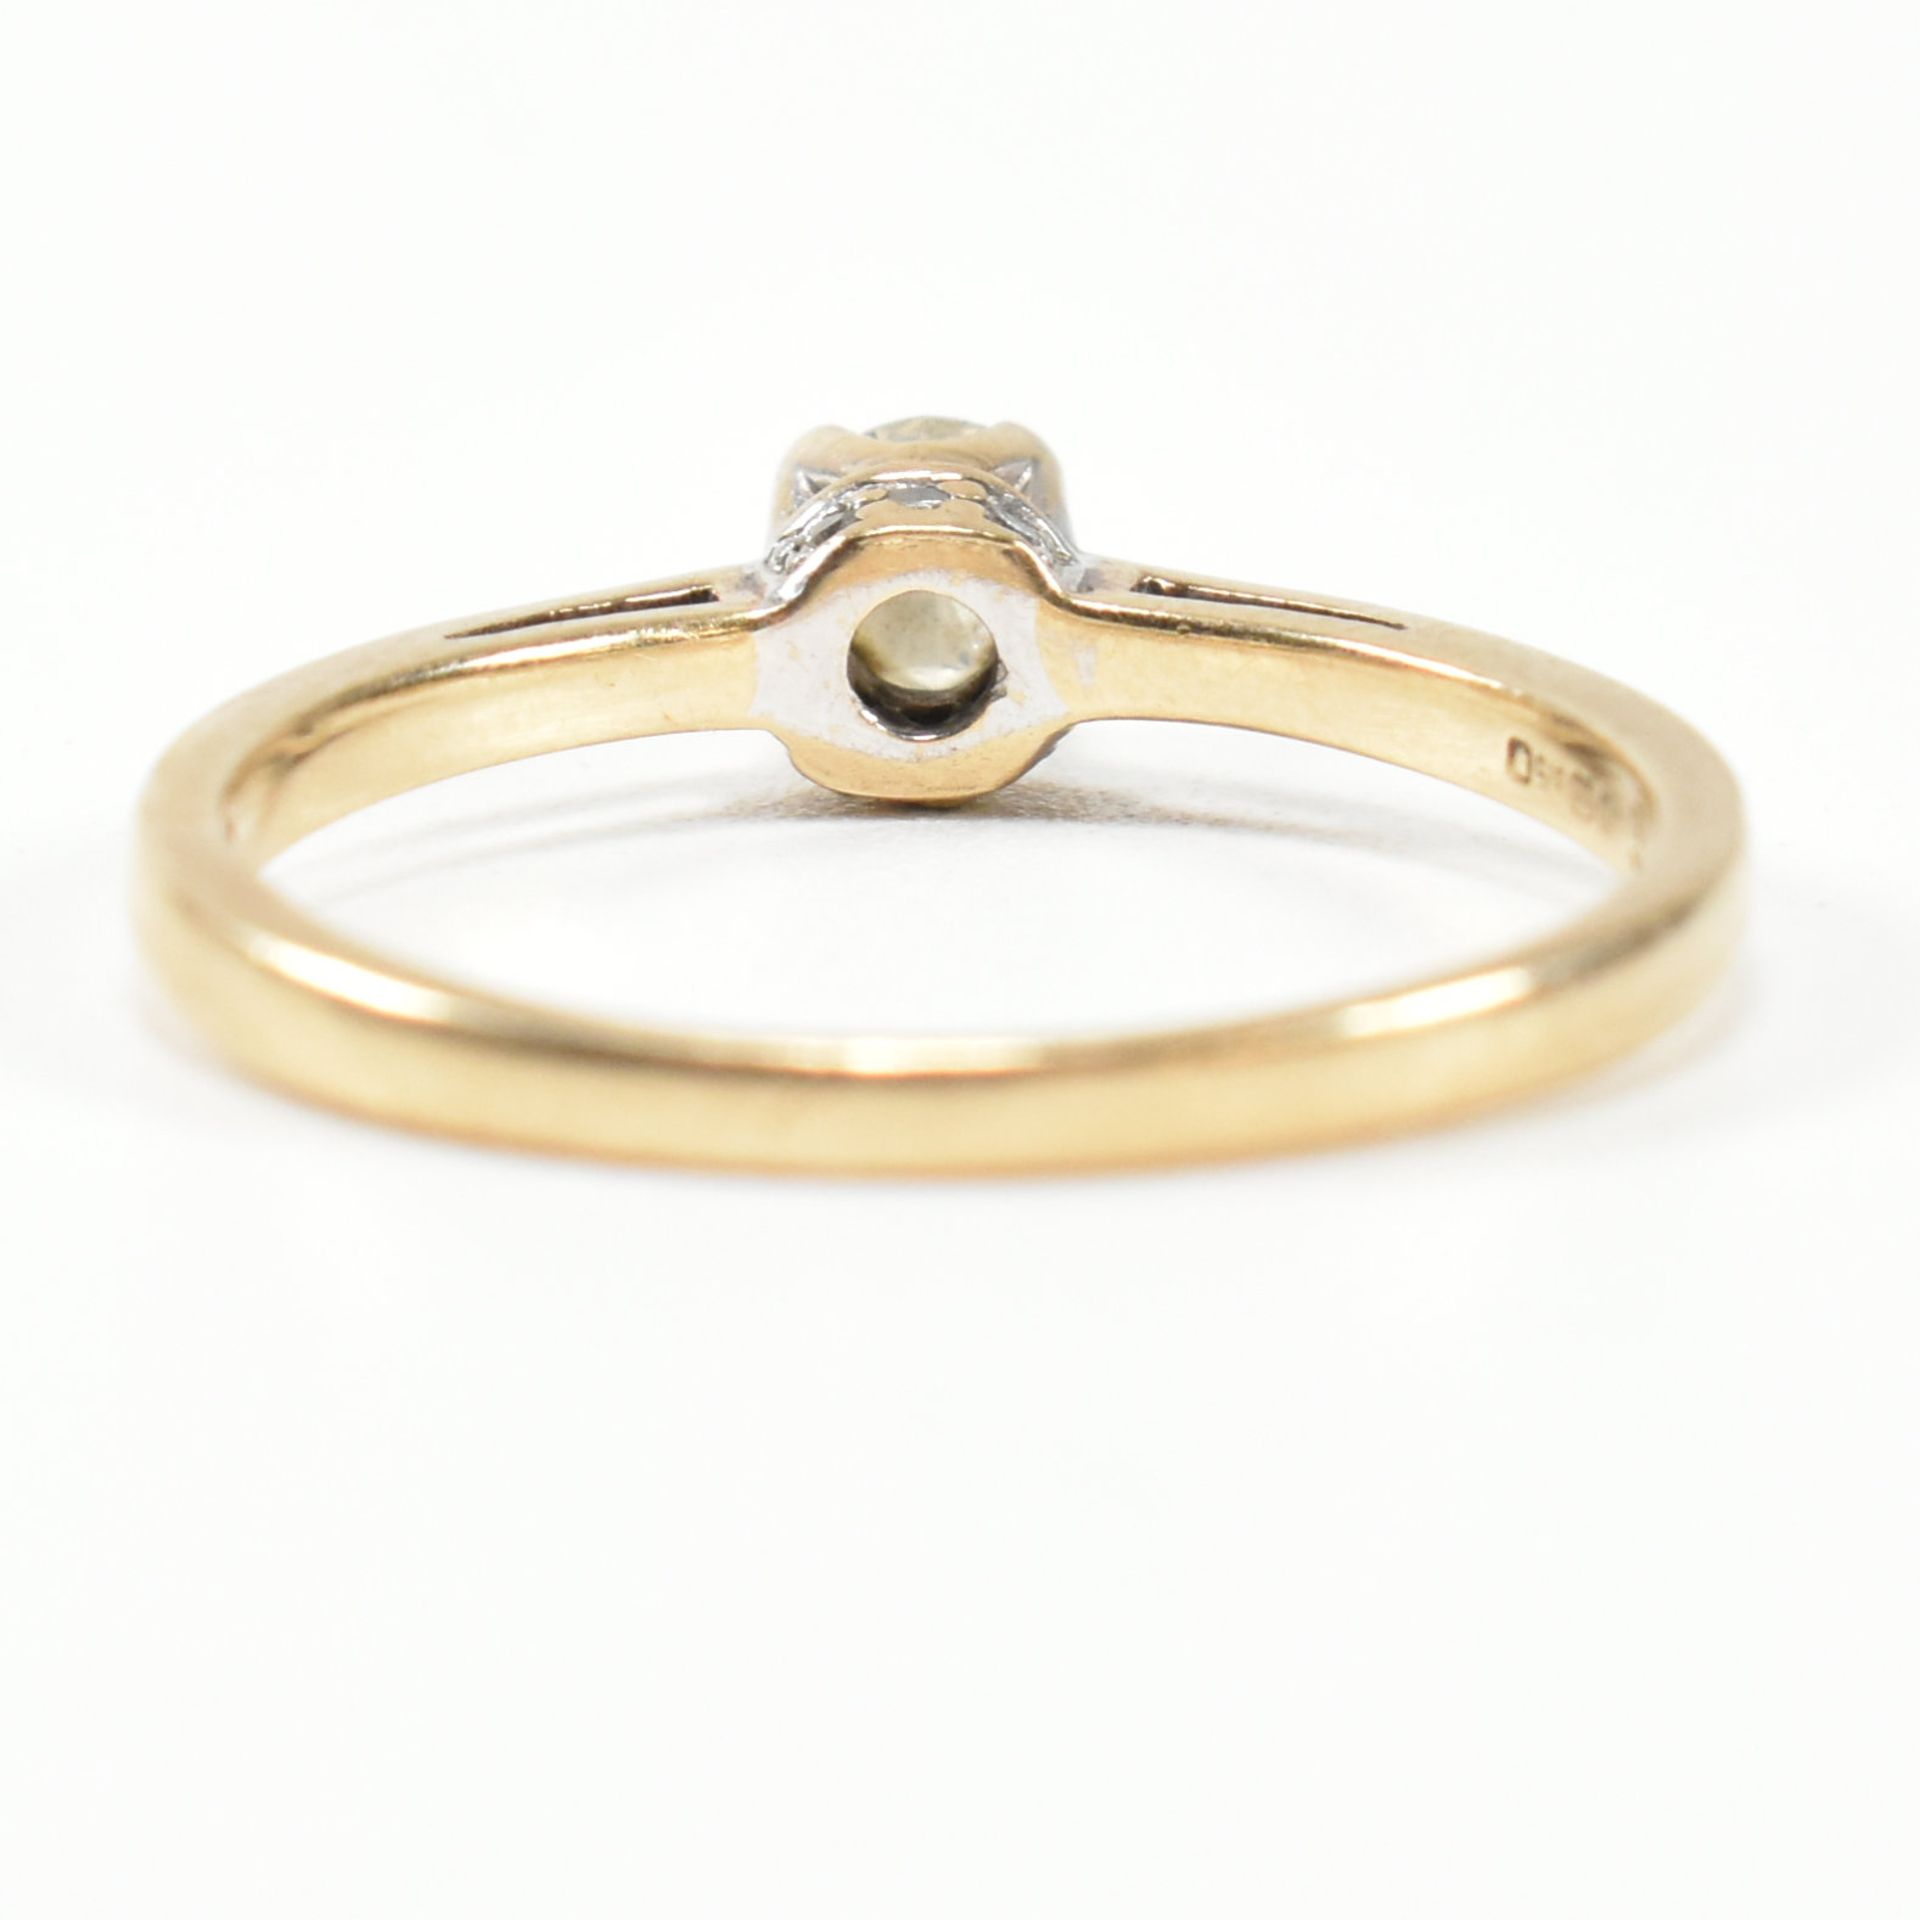 HALLMARKED 9CT GOLD & DIAMOND SOLITAIRE RING - Image 2 of 9